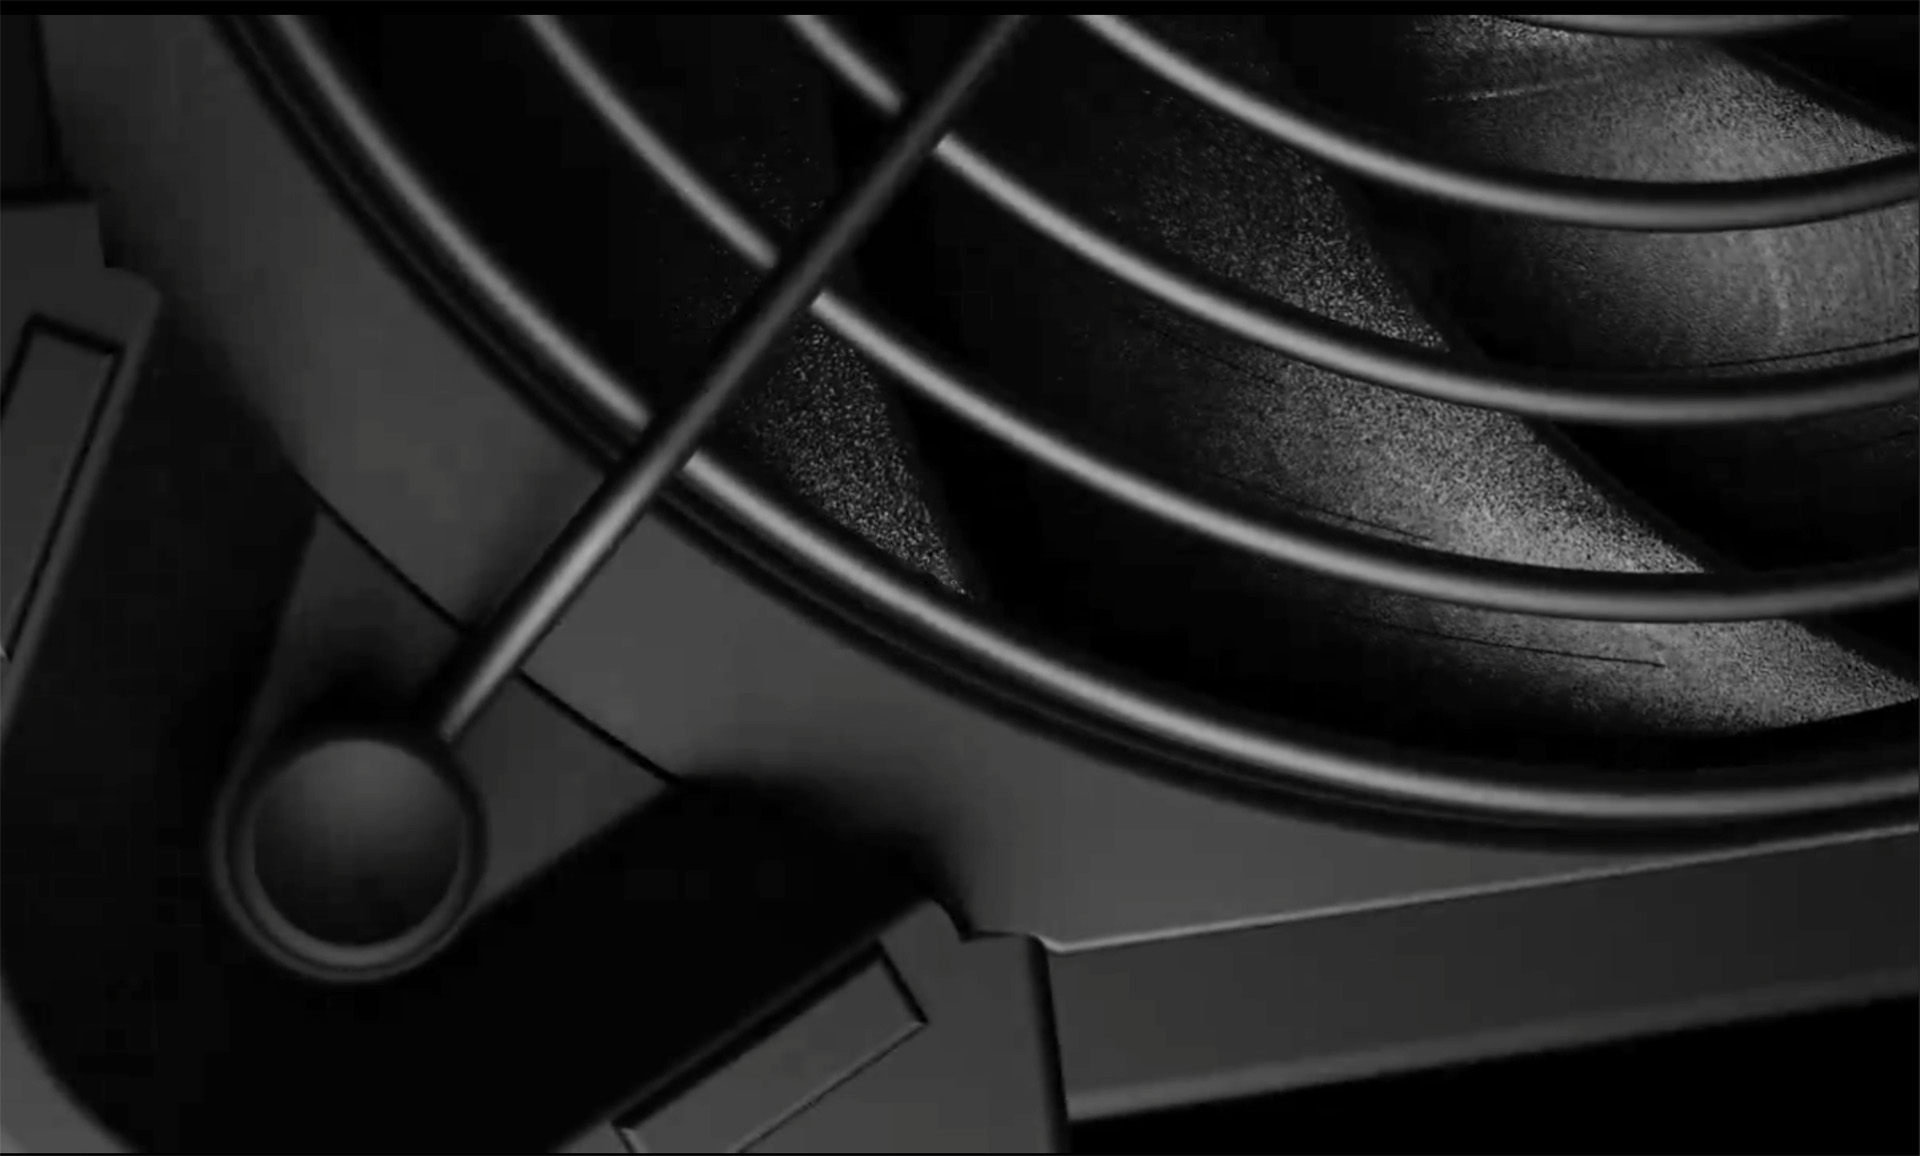 Noctua teases ‘something new’ that looks very much like the desk fan prototype it’s had on show before